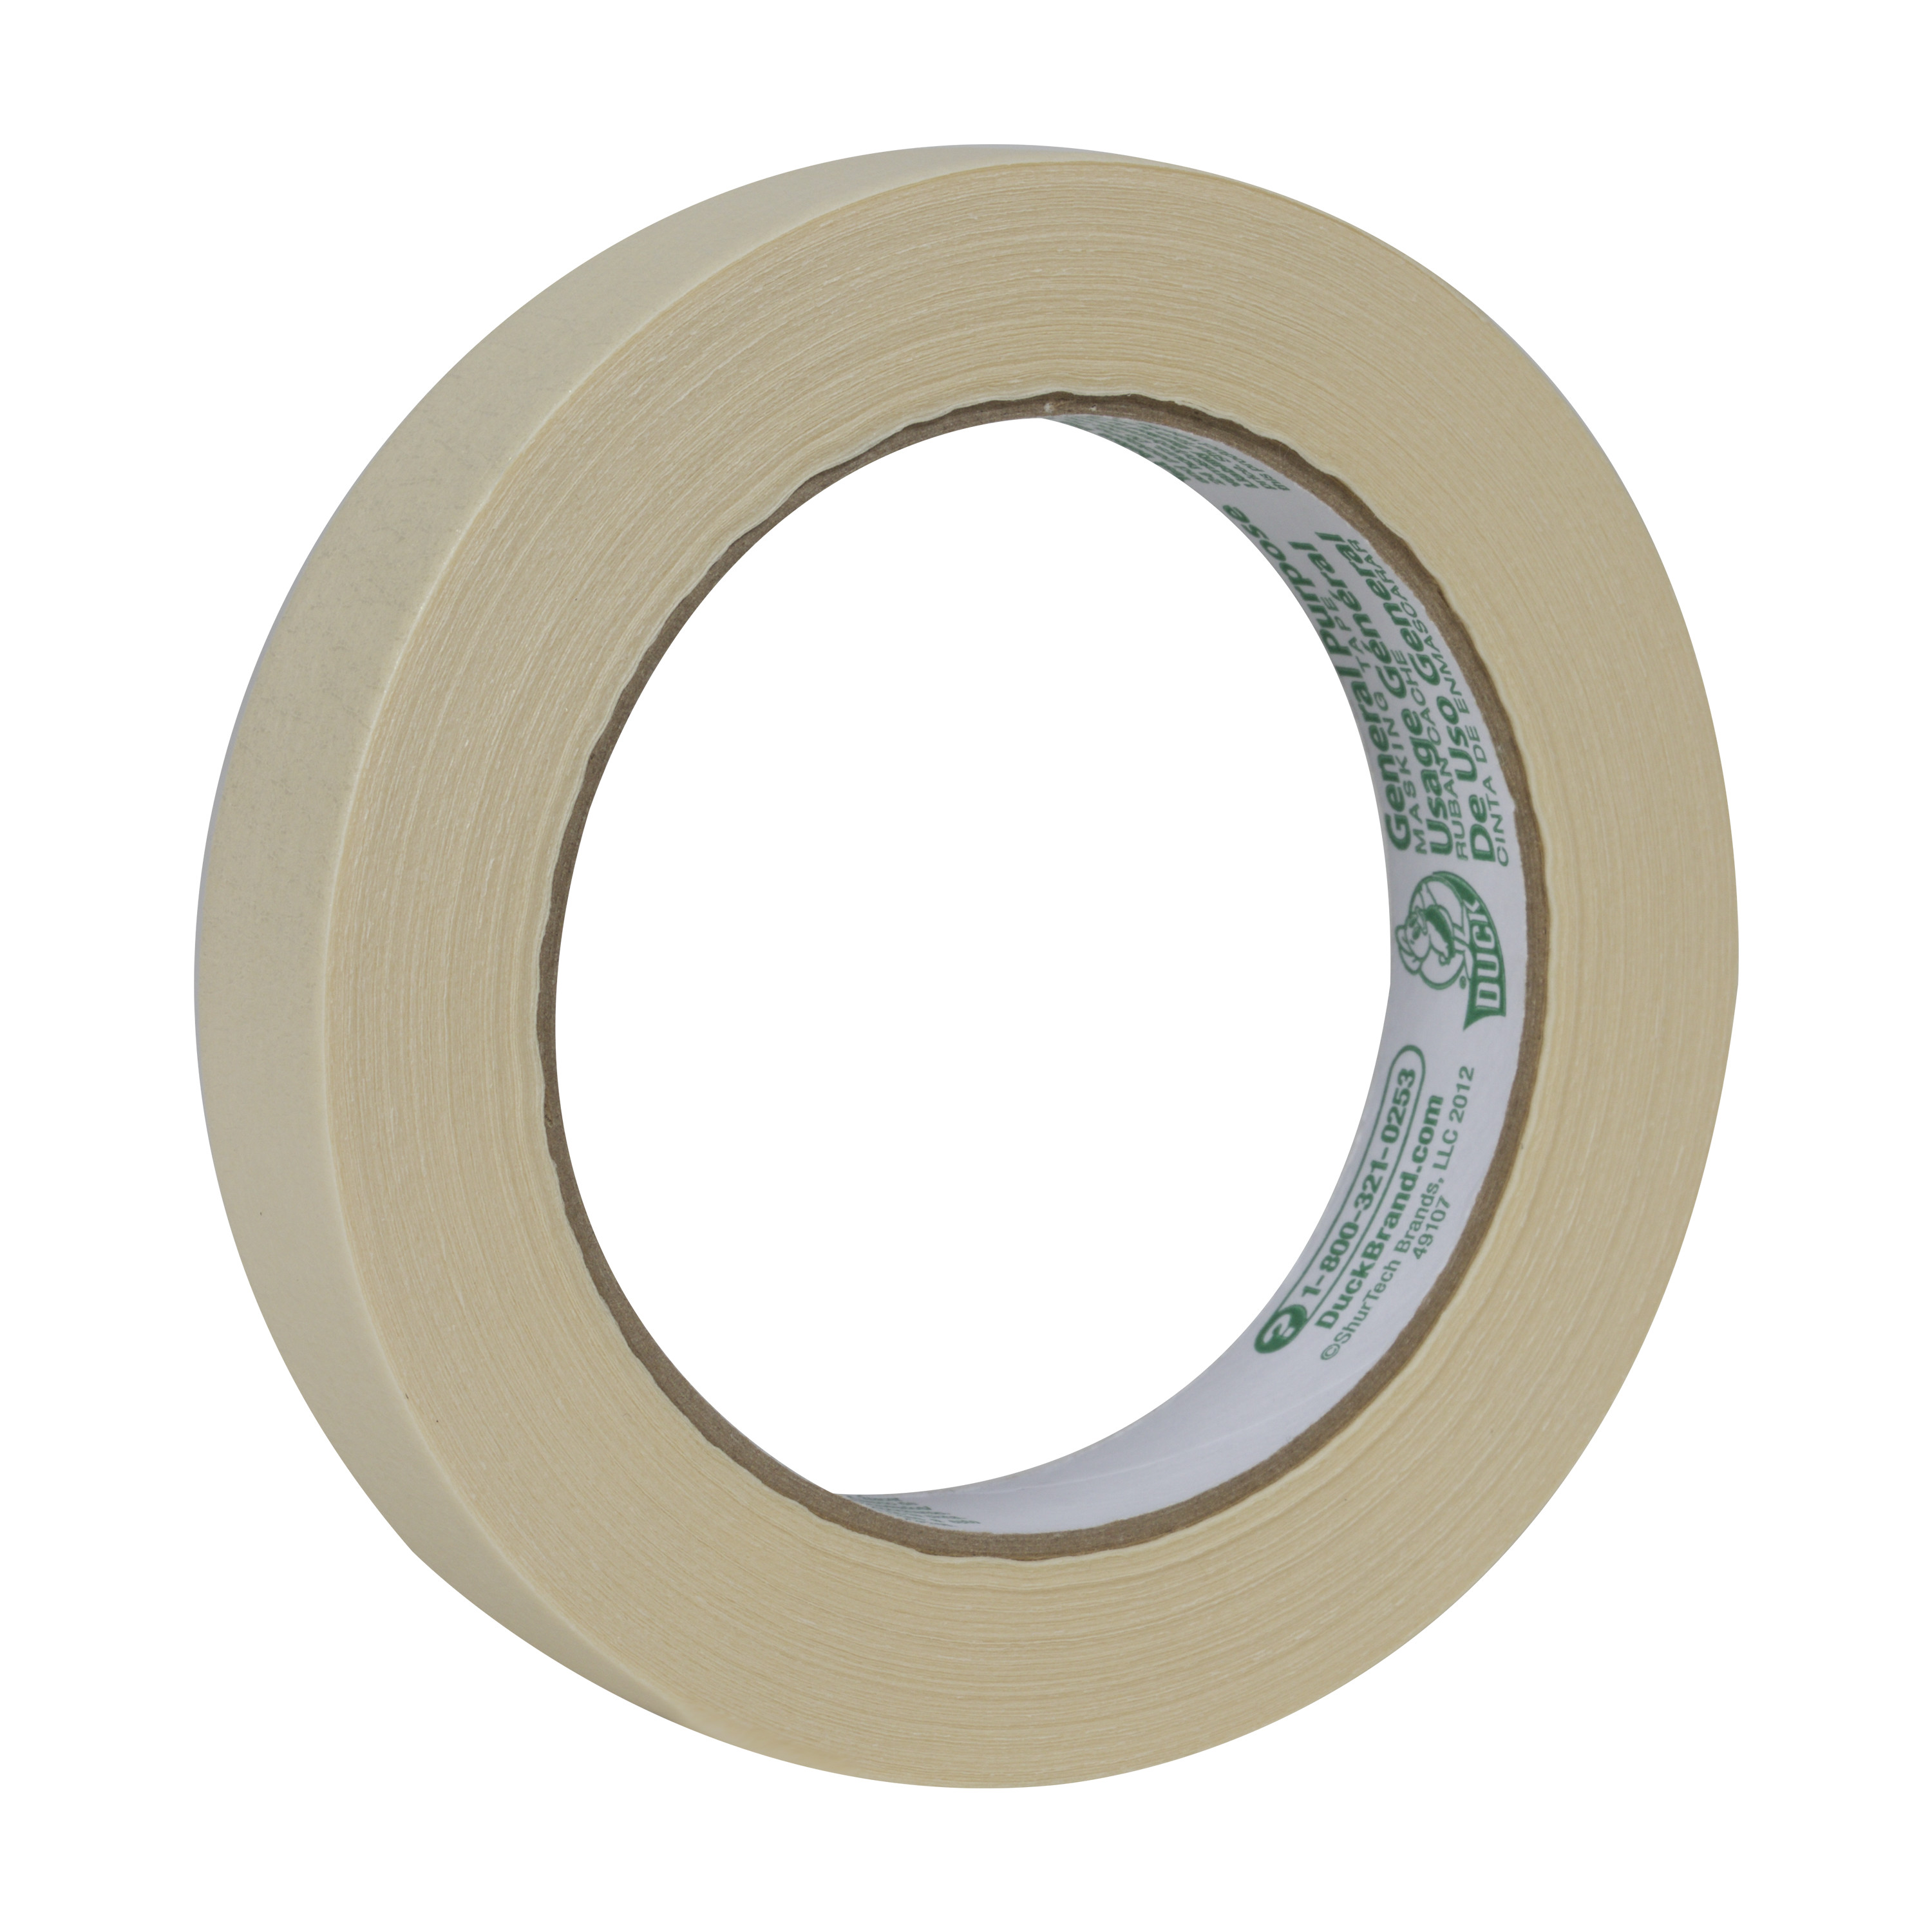 Duck Brand .7 in. x 55 yd. Beige General Purpose Masking Tape - image 3 of 10